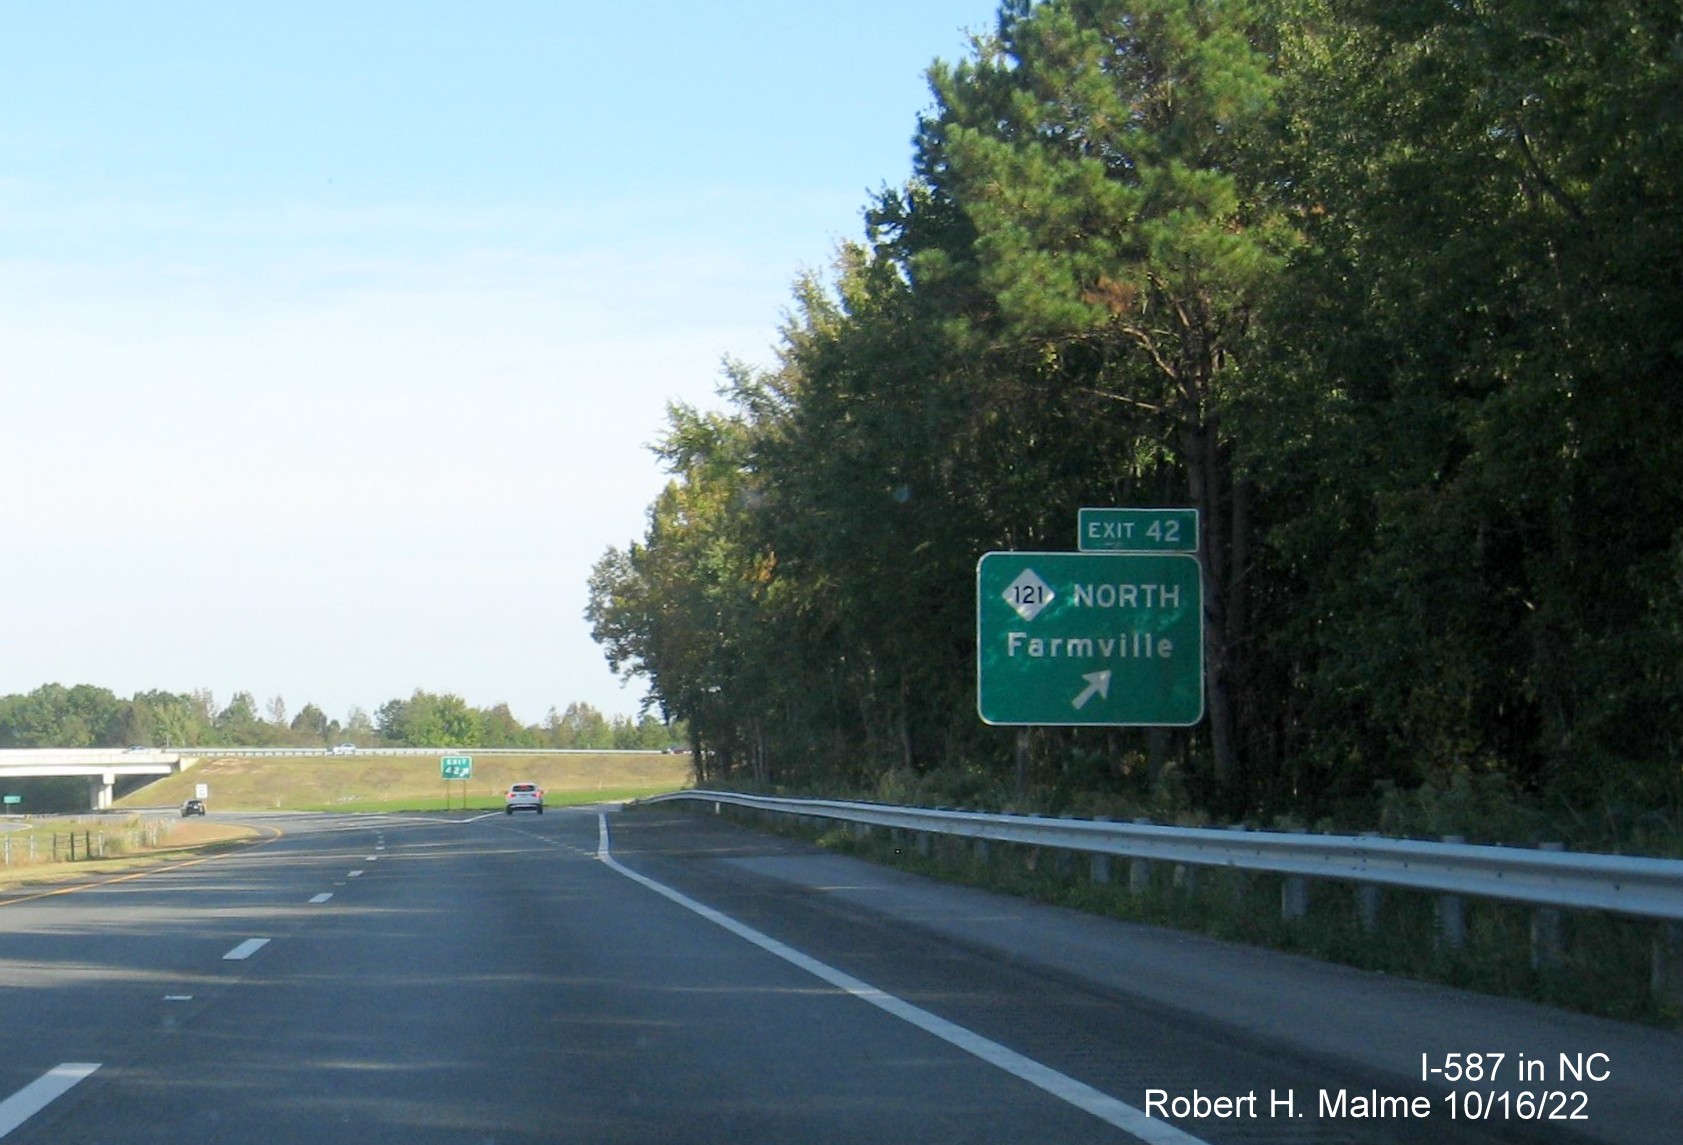 Image of ground mounted ramp sign for NC 121 North exit with new I-587 milepost exit number on I-587 East in Farmville, October 2022